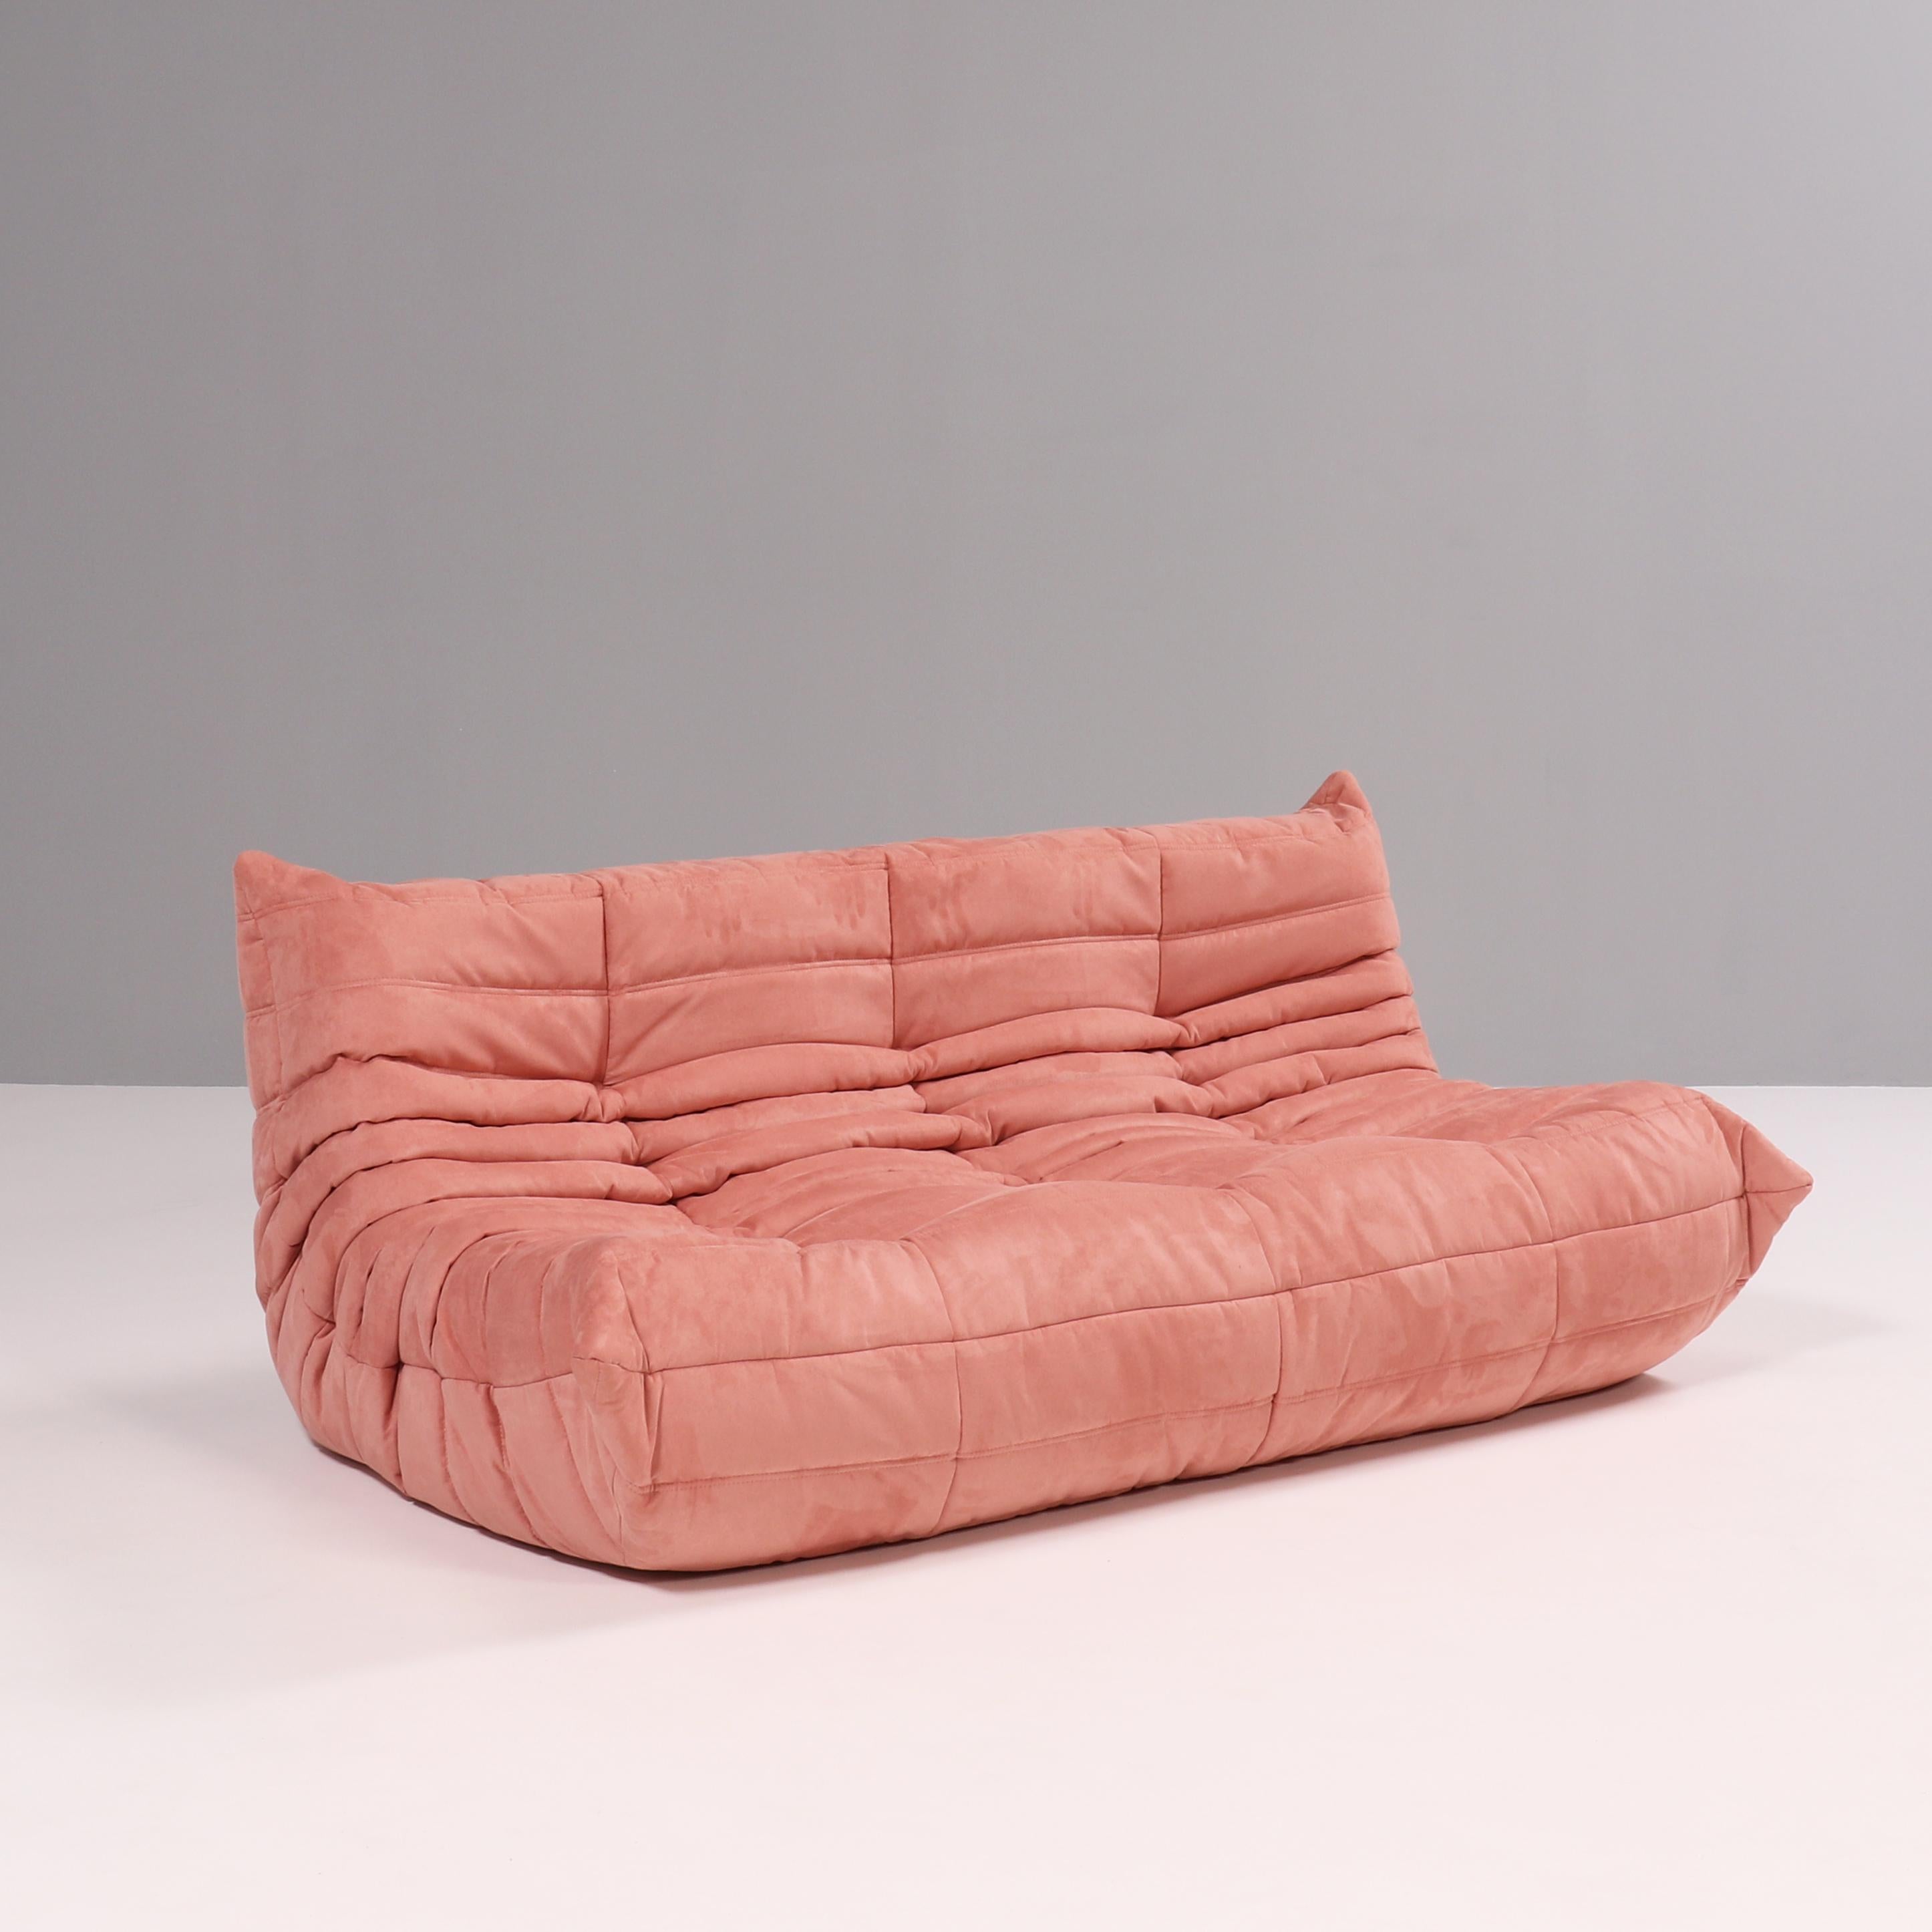 The iconic Togo orange sofa, originally designed by Michel Ducaroy for Ligne Roset in 1973, has become a design midcentury Classic.

This three-seat sofa is incredibly versatile and can be used alone or paired with other pieces from the